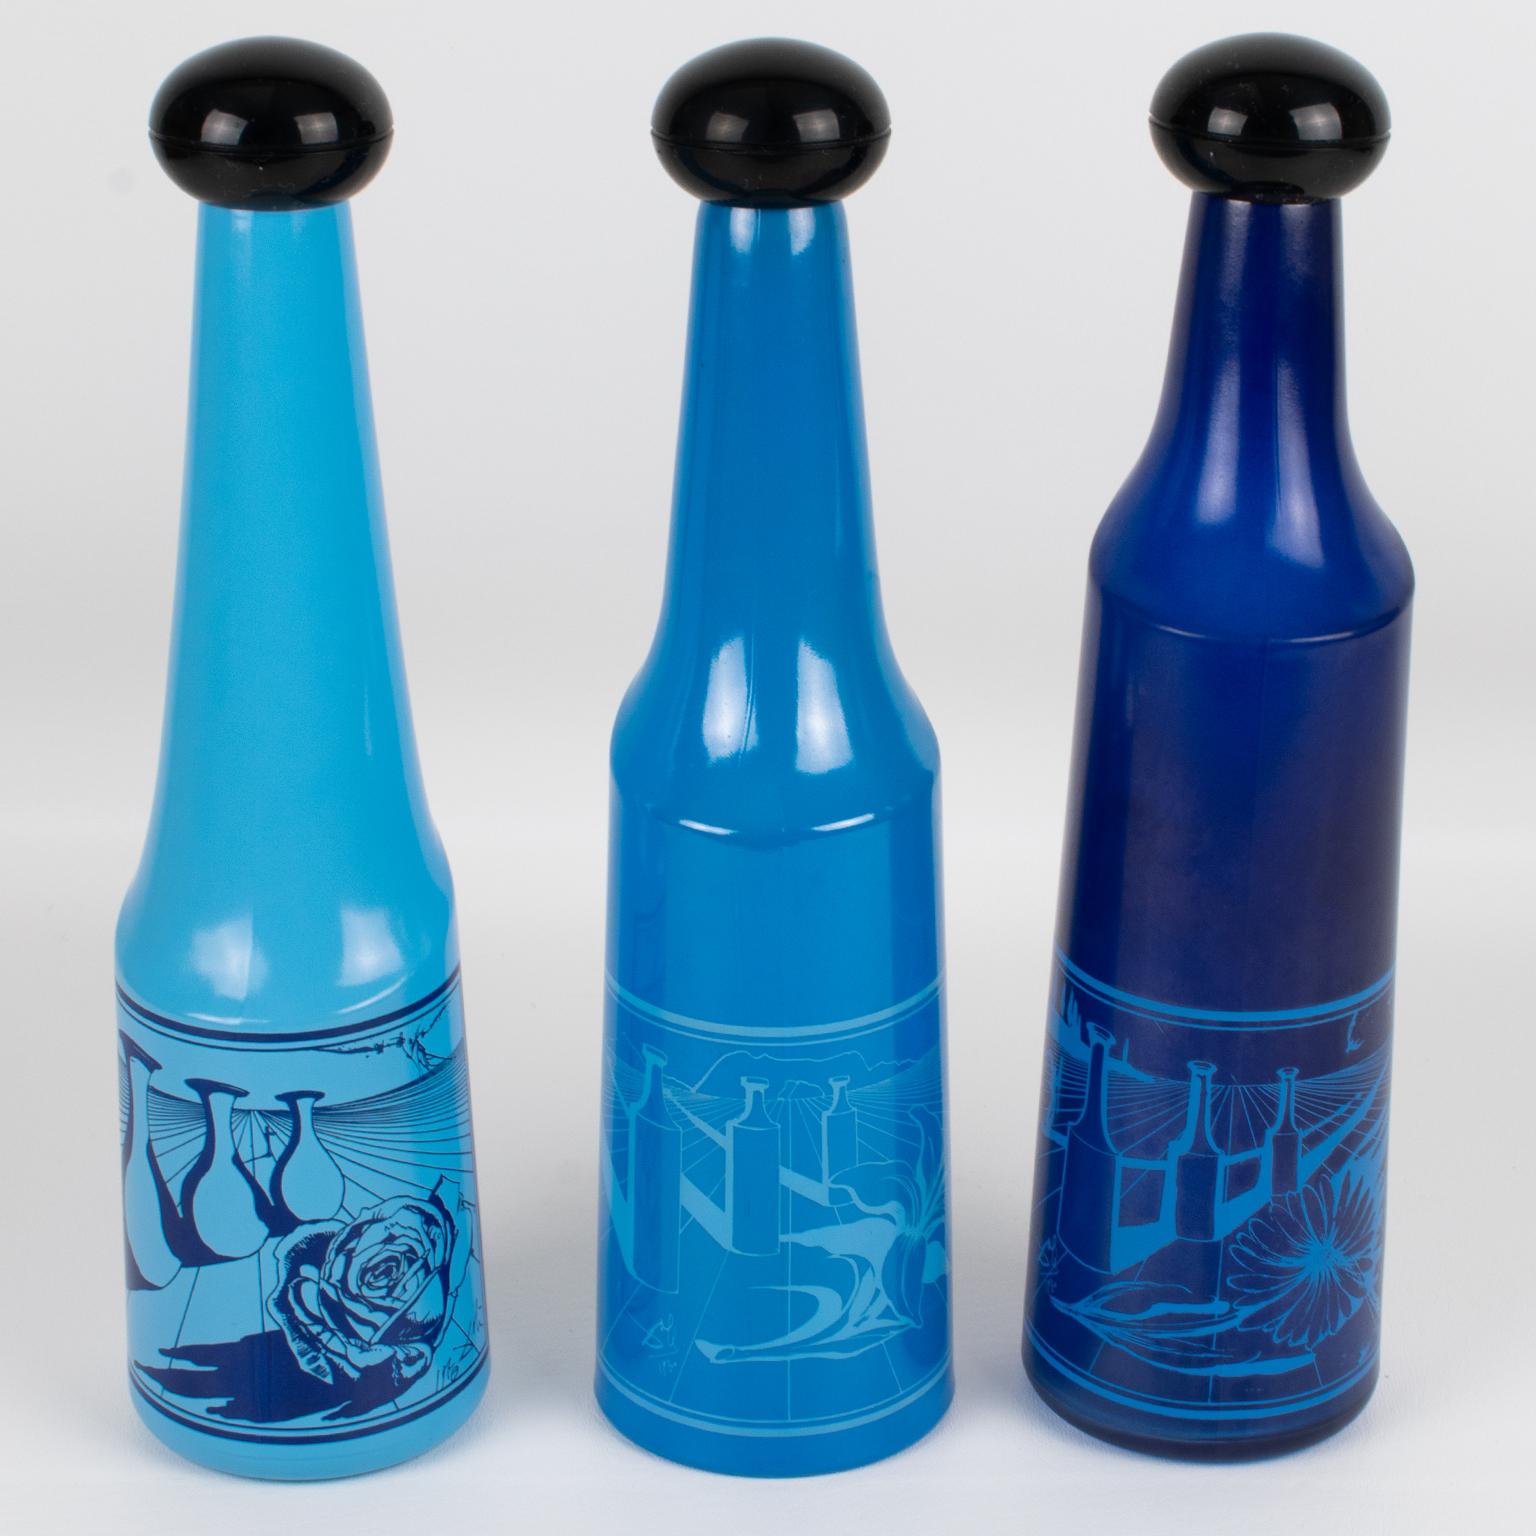 This stunning set of three colored glass bottles was designed by Salvador Dali (1904 - 1989) for Rosso Antico, Ltd, Italy, in the 1970s. Those geometric barware liquor bottles are in an assorted blue hue with Dali's surrealistic designs in blue